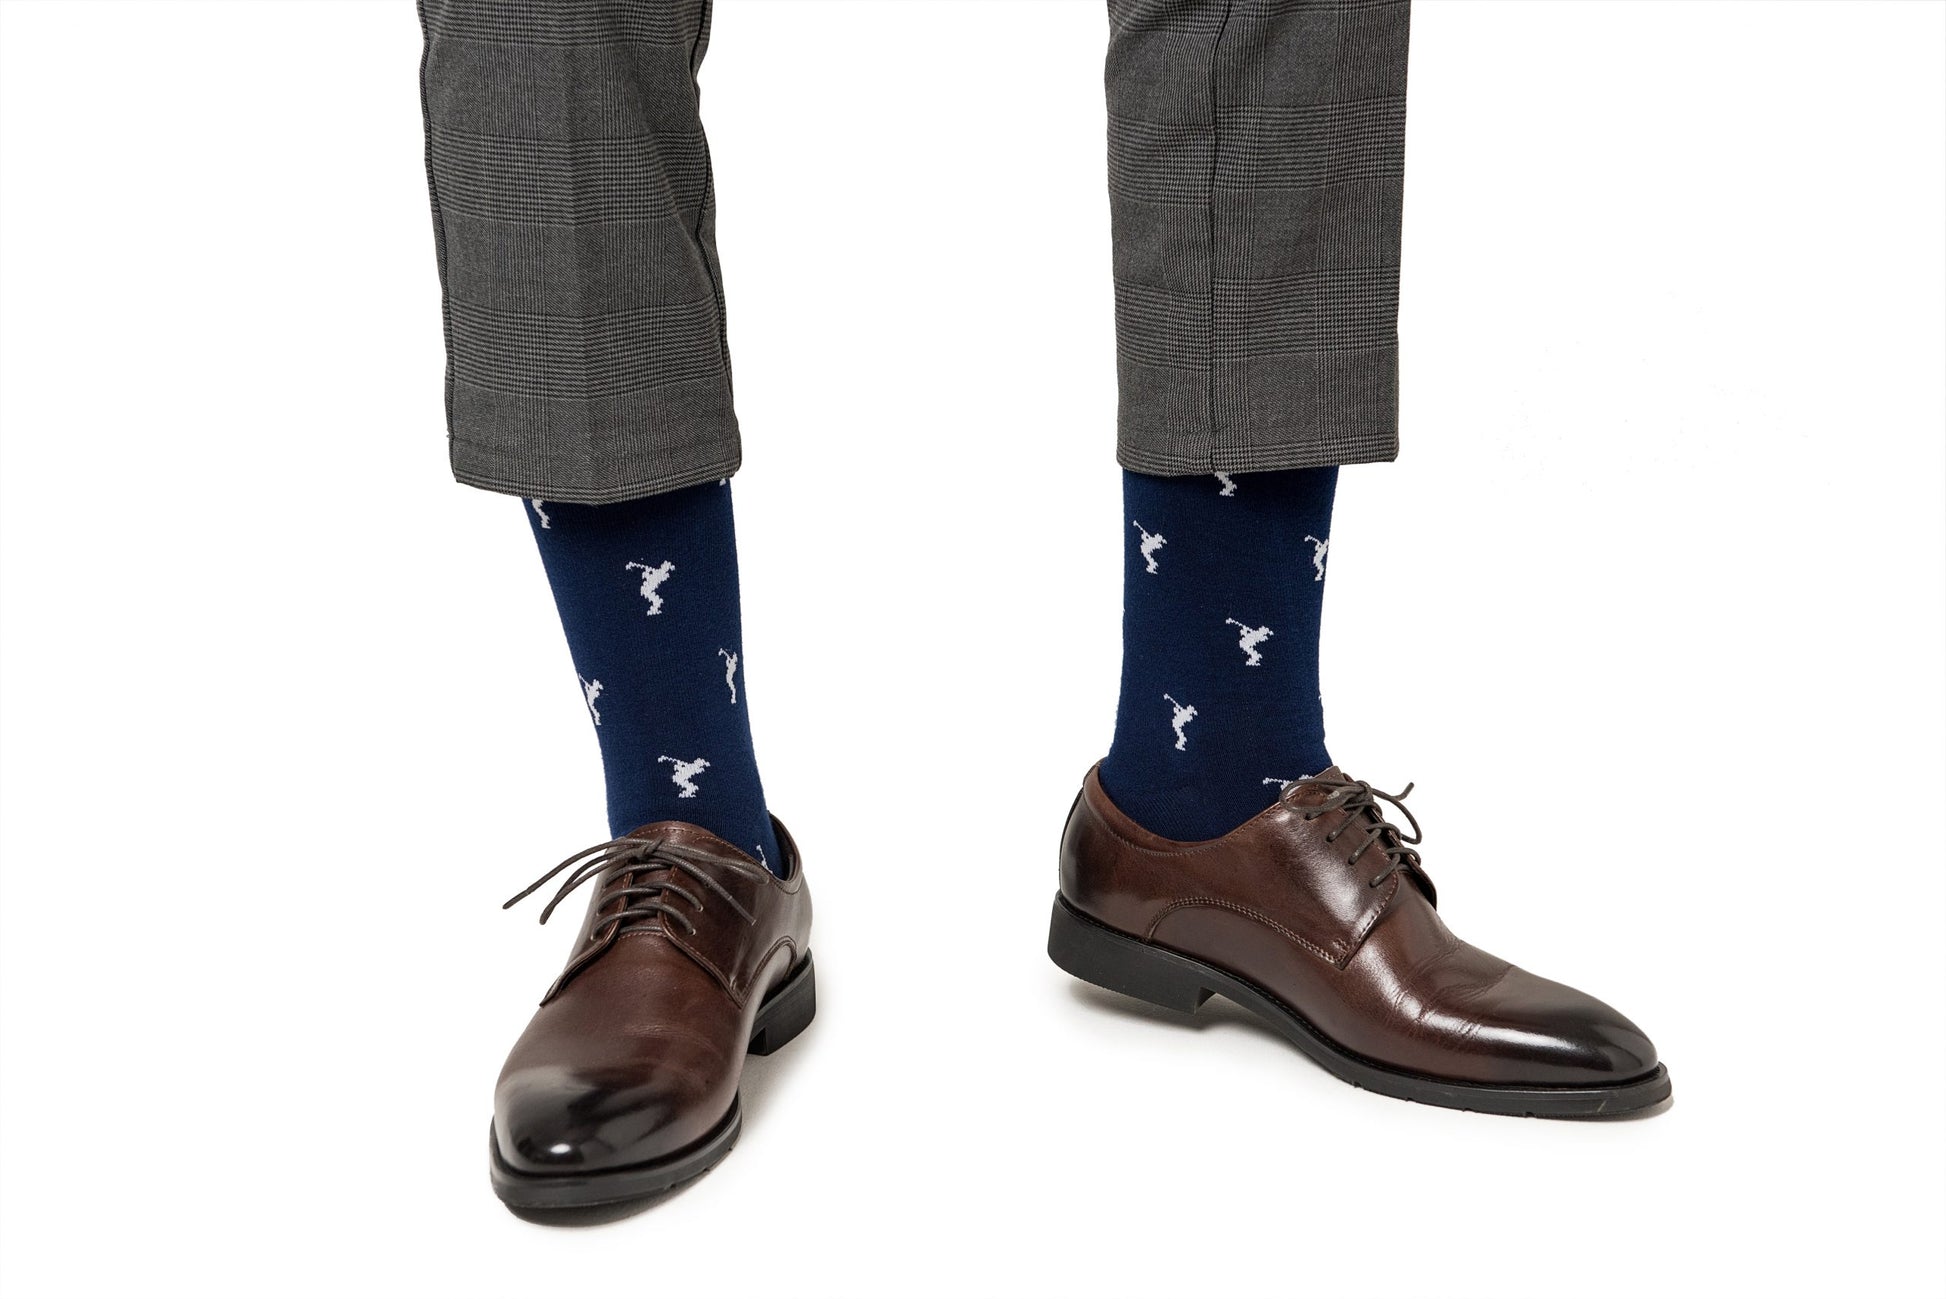 A pair of legs wearing brown shoes and Golf Swing Socks.